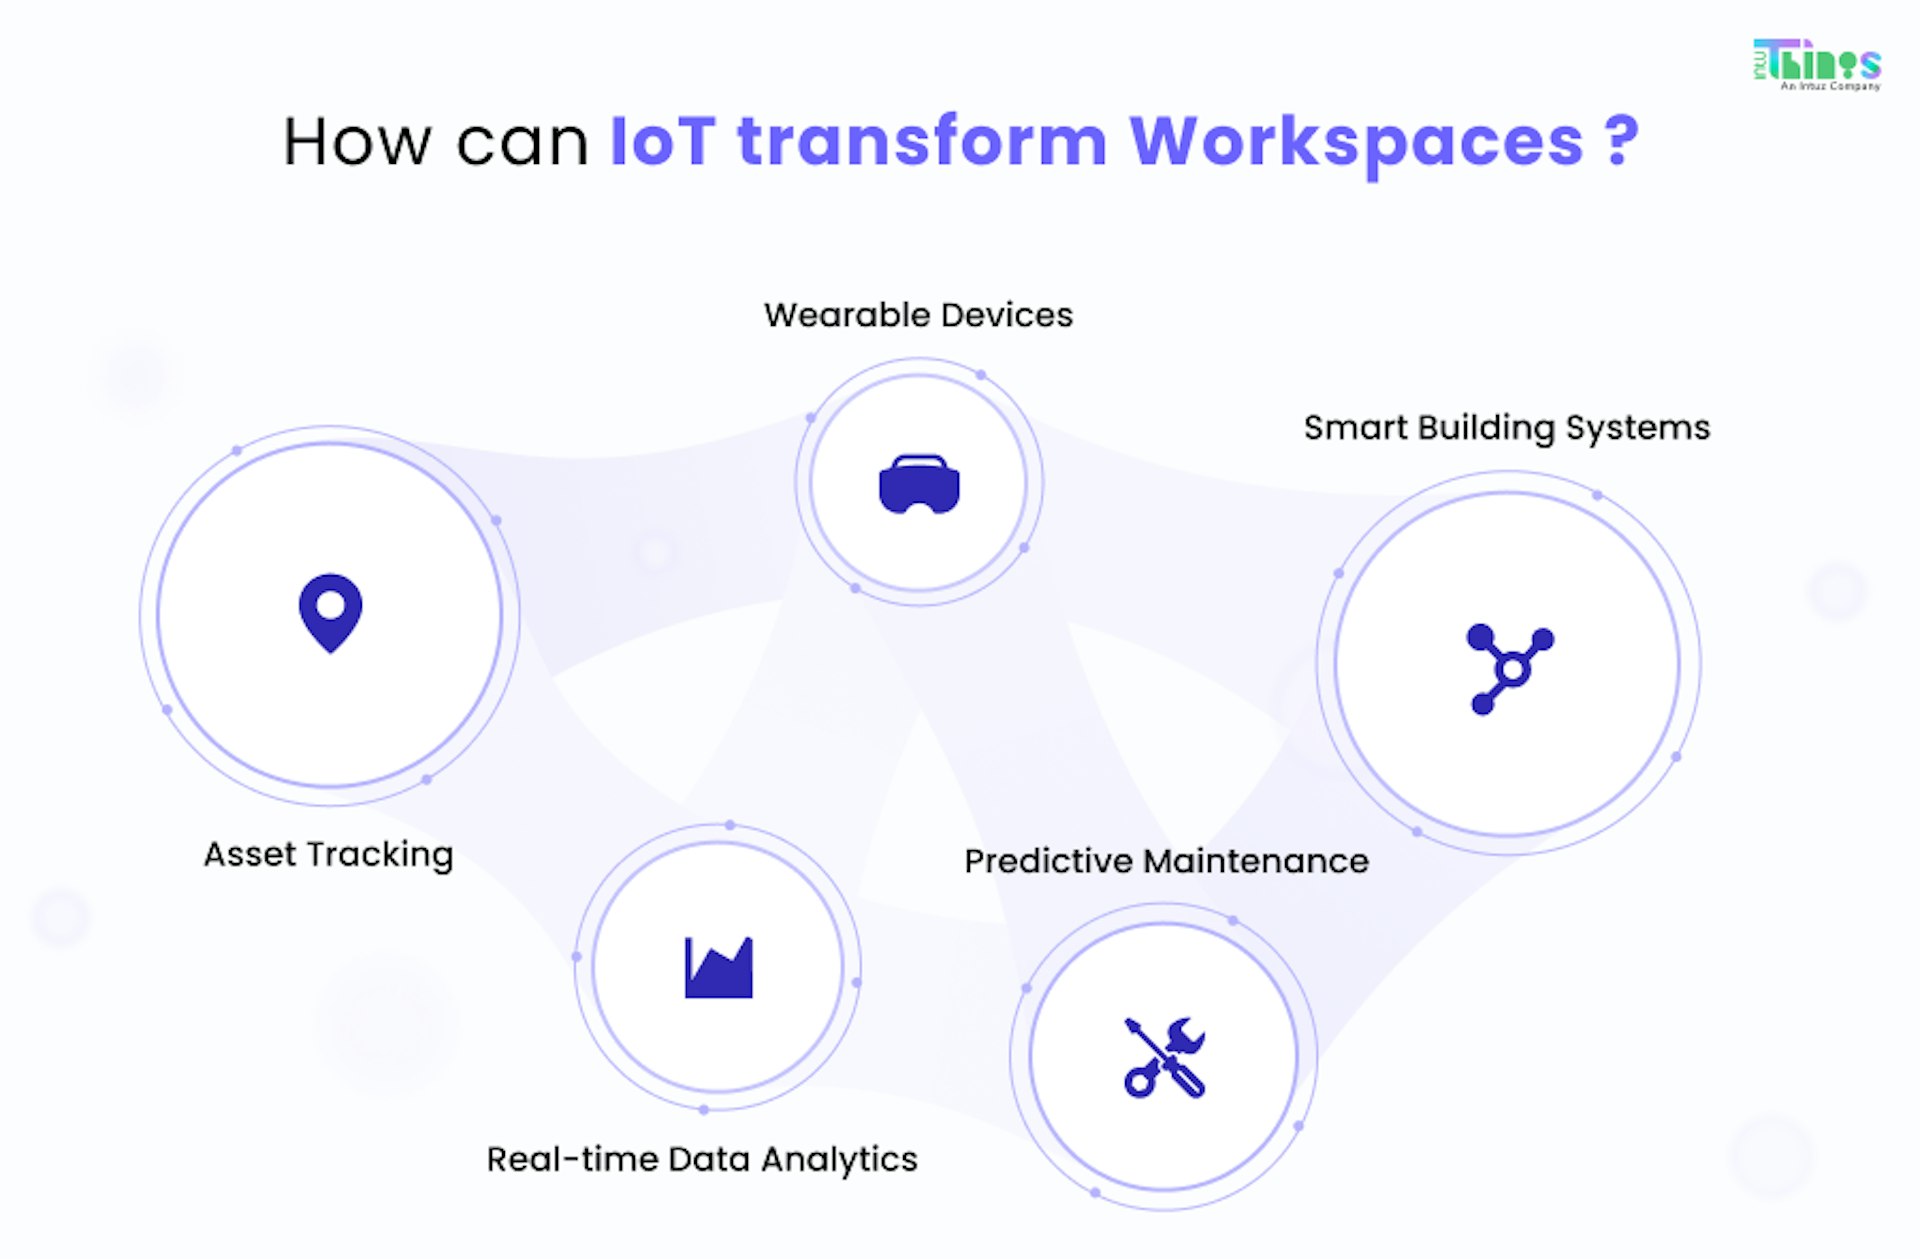 Transforming workspaces with IoT